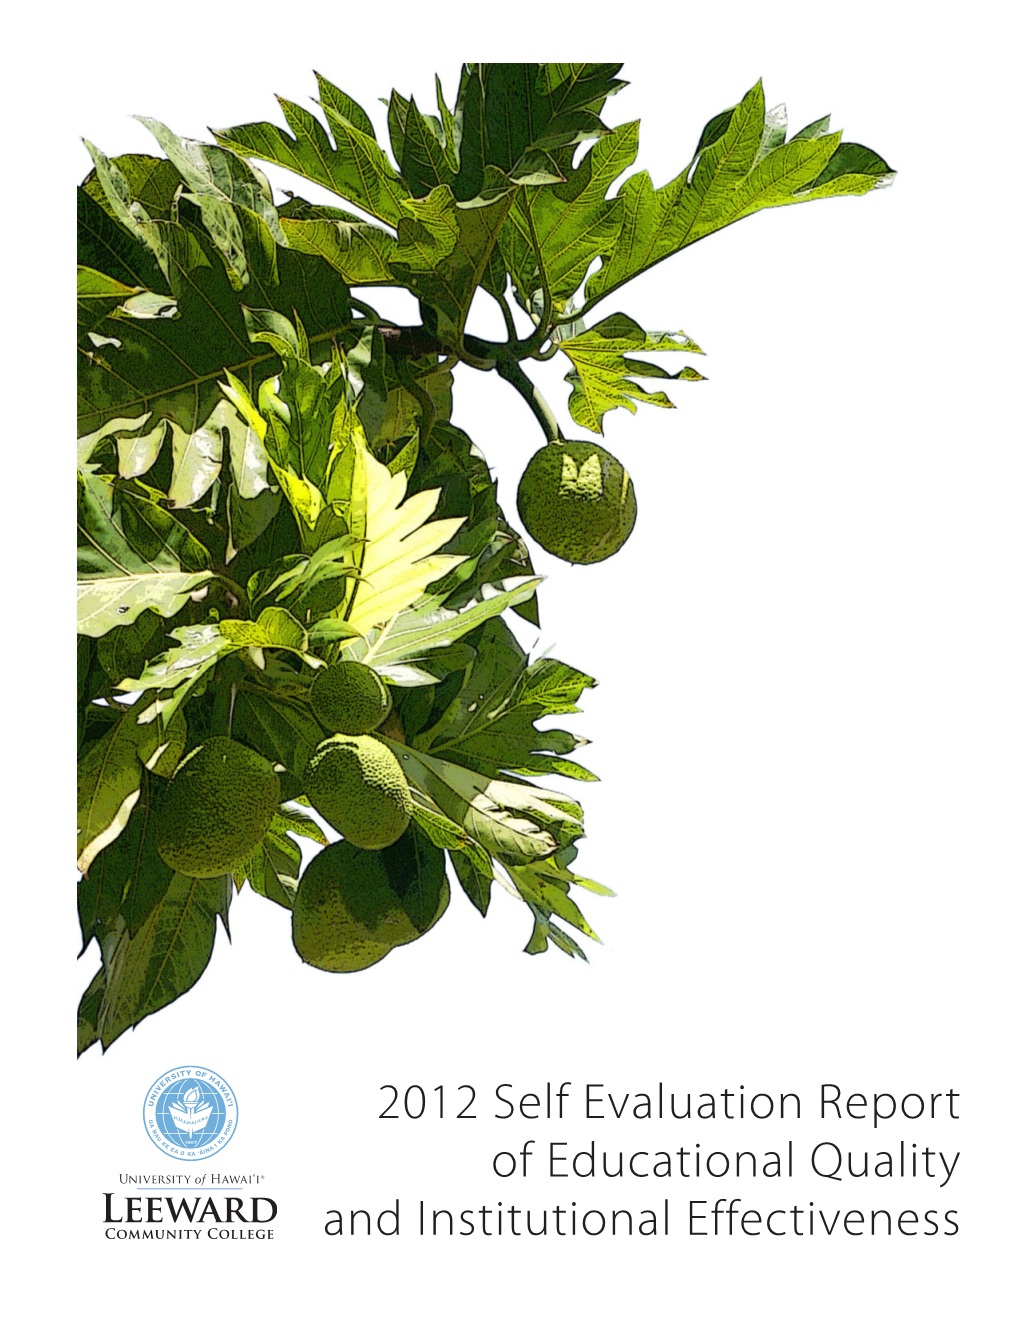 2012 Self Evaluation Report of Educational Quality and Institutional Effectiveness